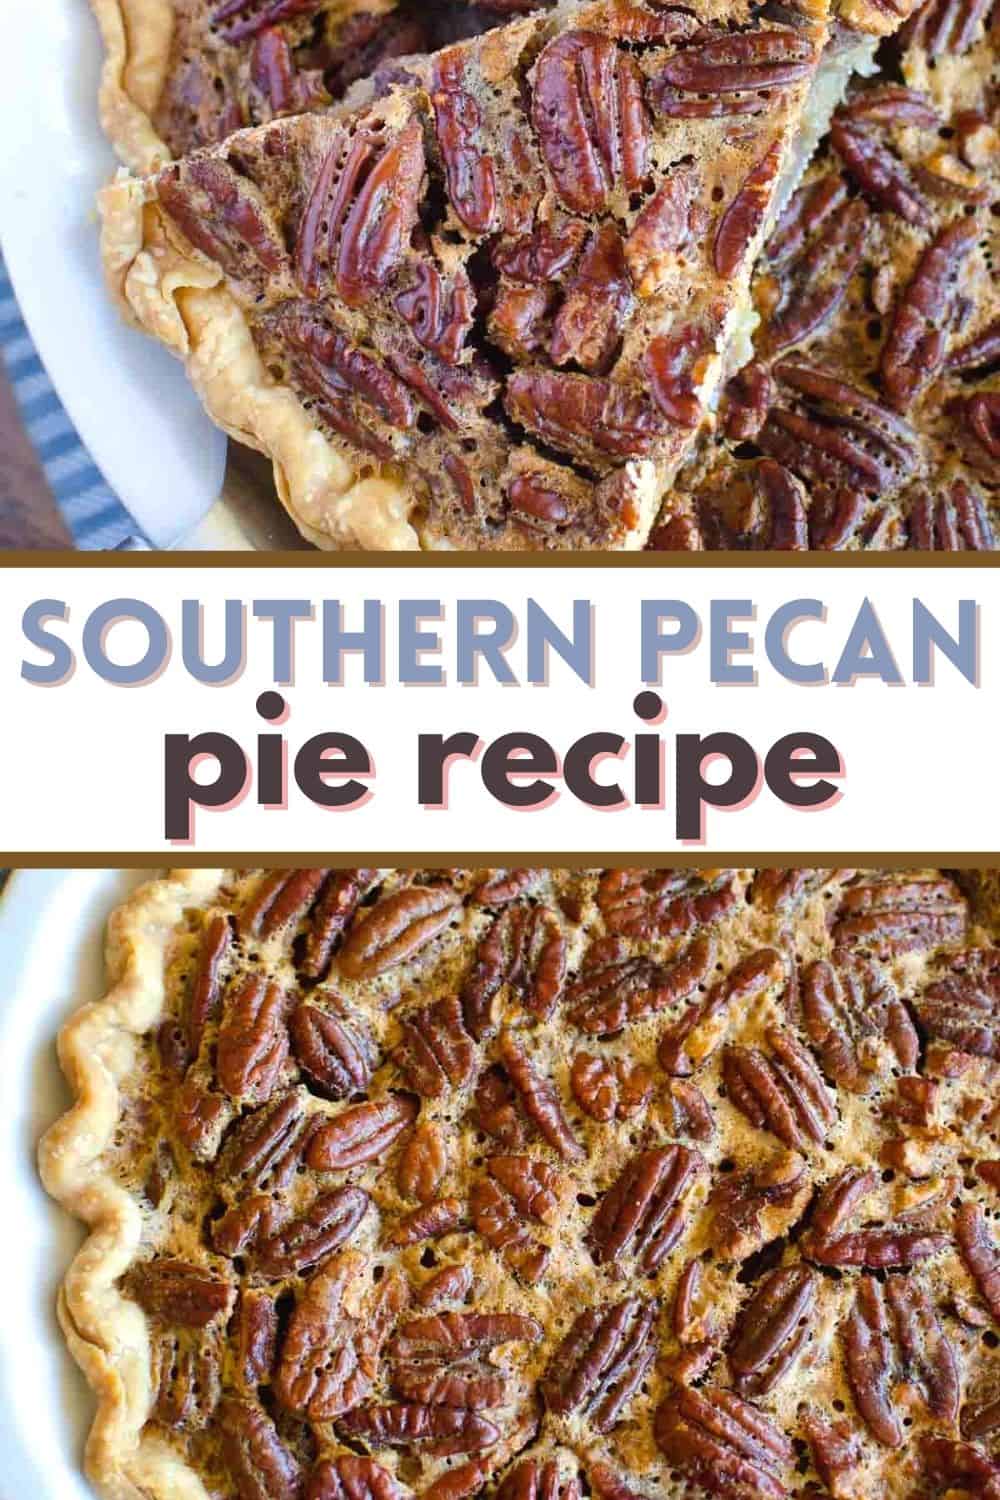 Pecan pie is a classic southern pie with just a few ingredients and few minutes. Our recipe is loaded with pecans and easy to make with a refrigerated pie crust.